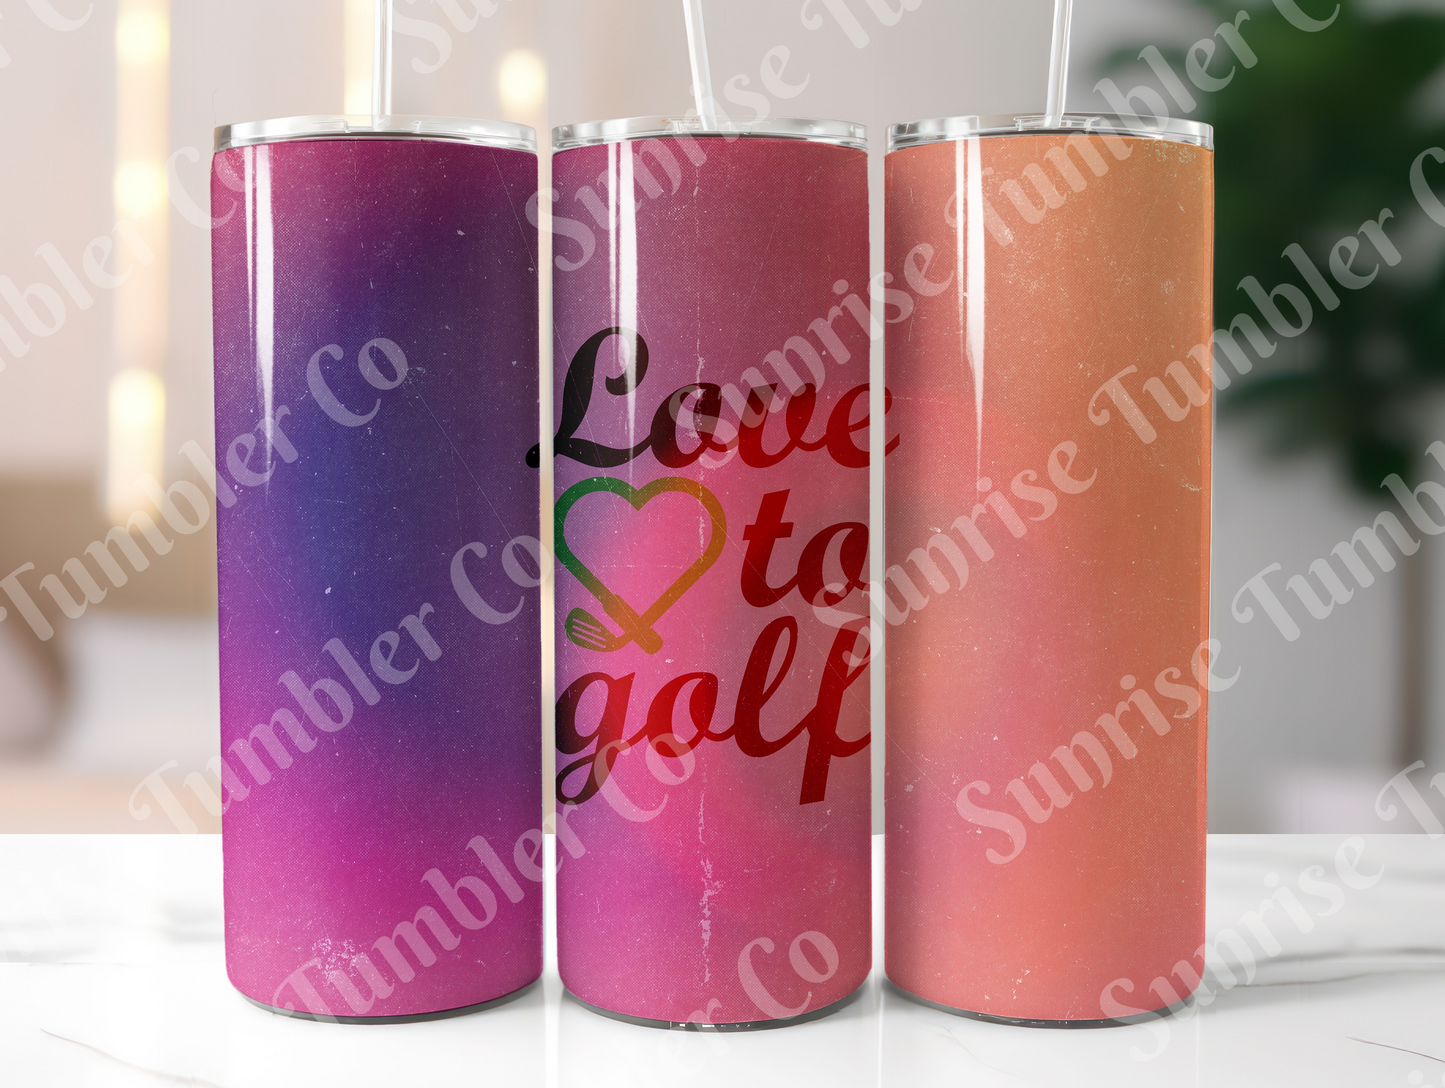 Golf Variety Part 1 - 20oz and 30oz Tumblers (Glow In The Dark Green And Blue Available)